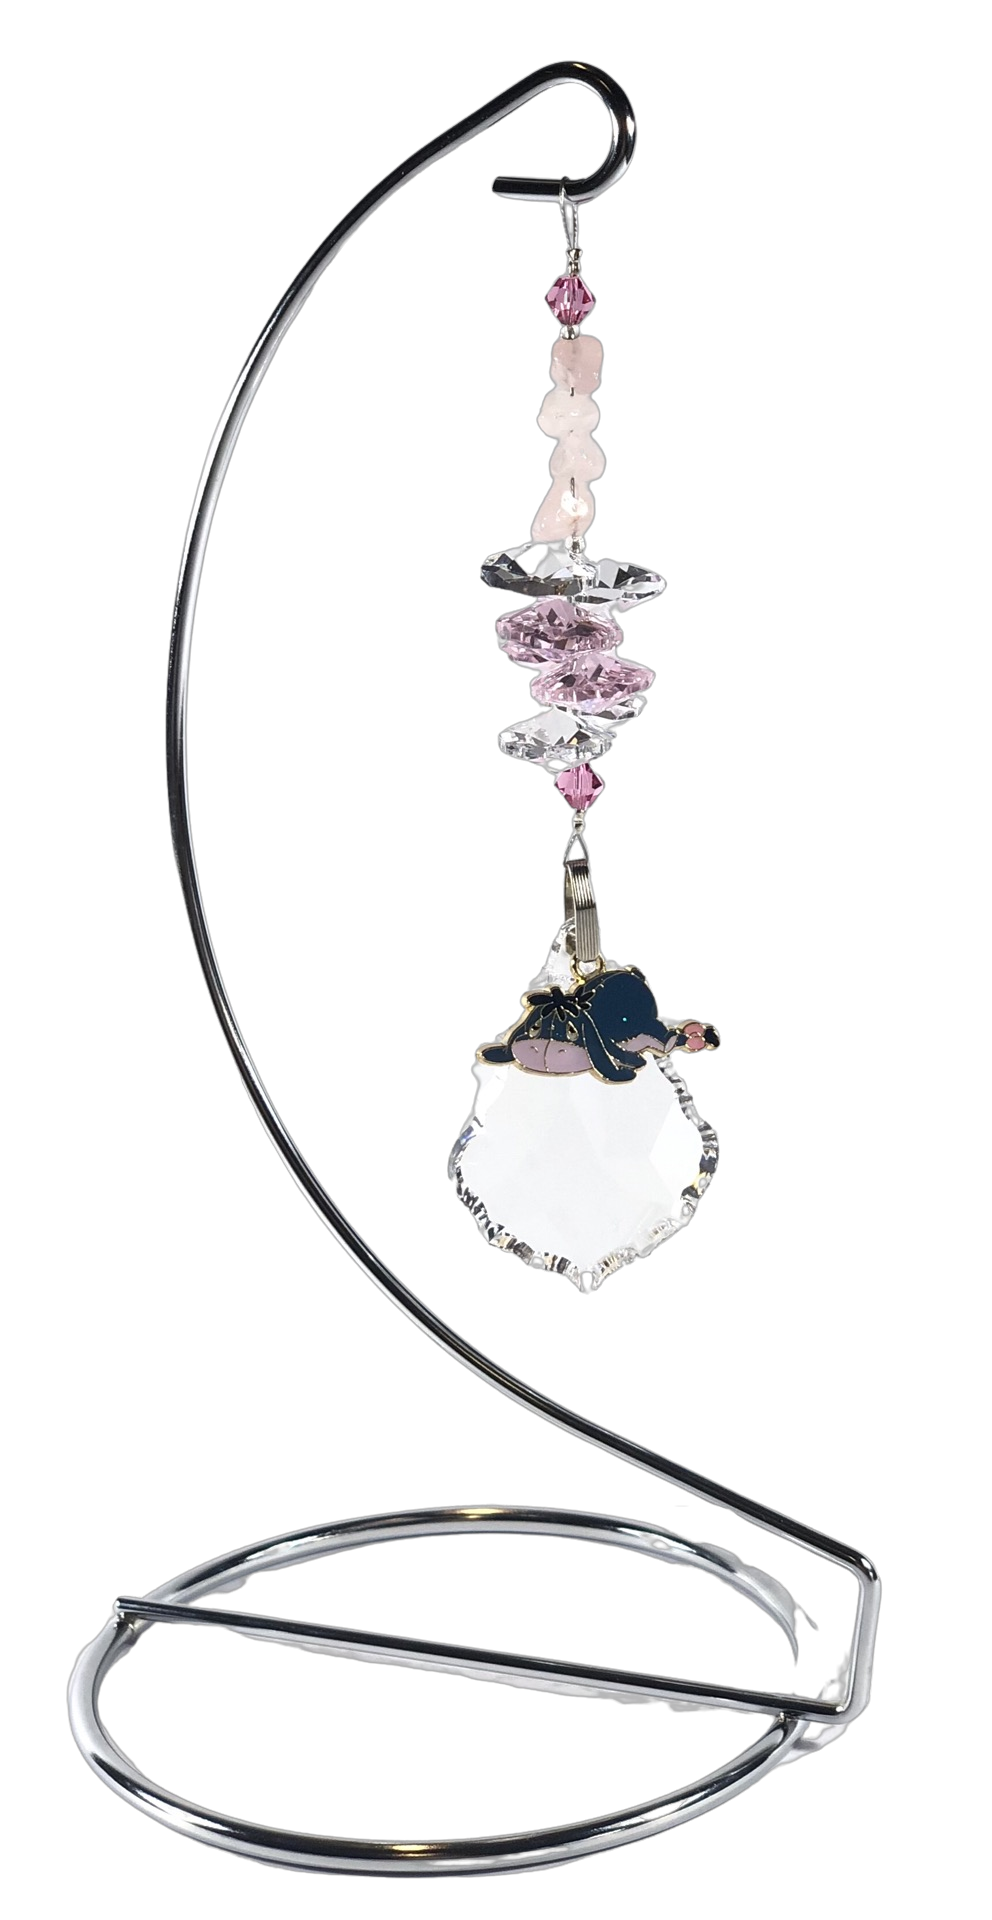 Winnie The Pooh - Eeyore crystal suncatcher is decorated with rose quartz gemstones and come on this amazing stand.